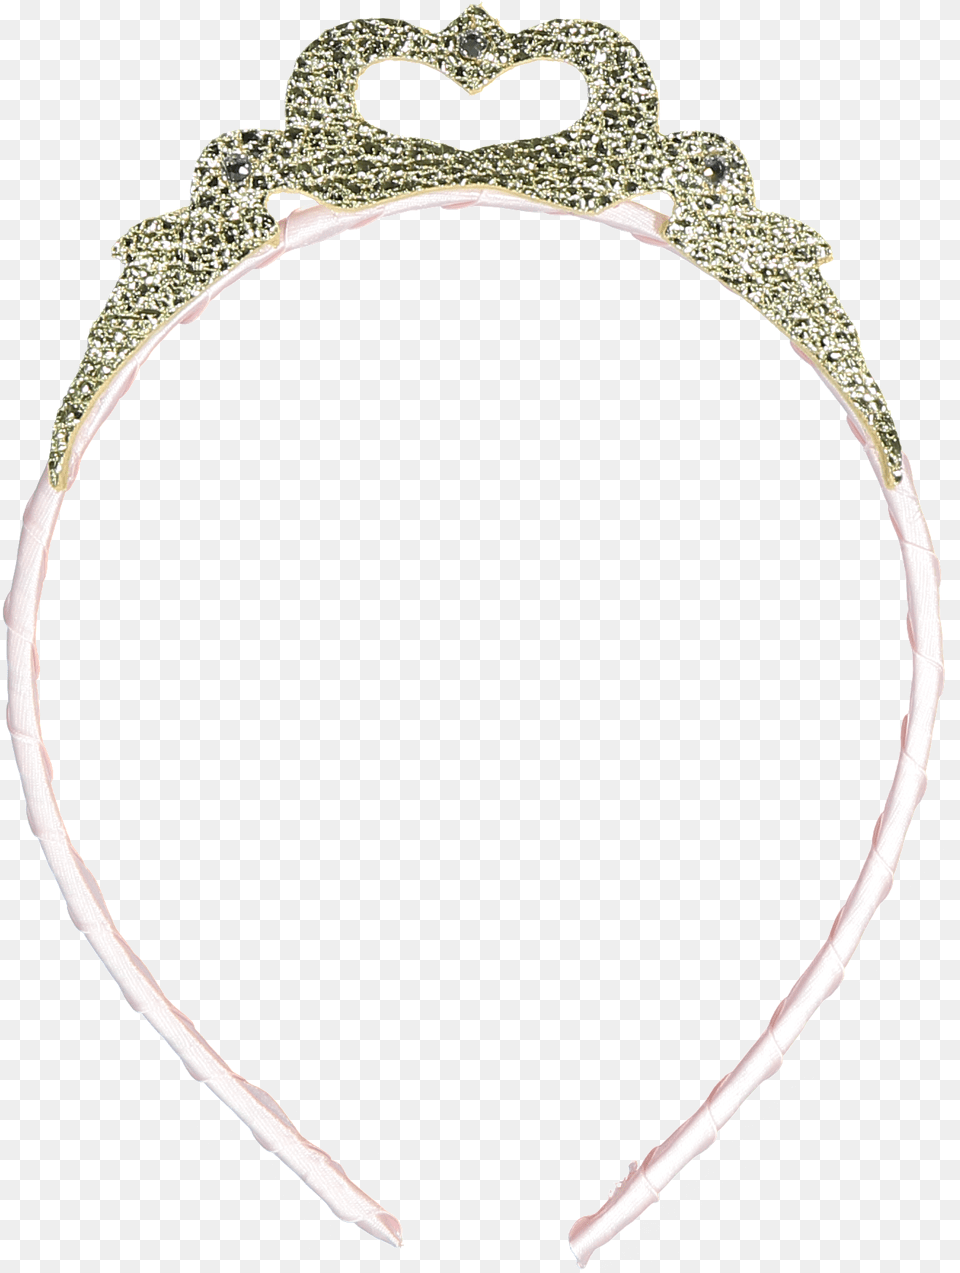 Download Princess Gold Crown Headpiece Image With Headpiece, Accessories, Jewelry, Bracelet, Necklace Png